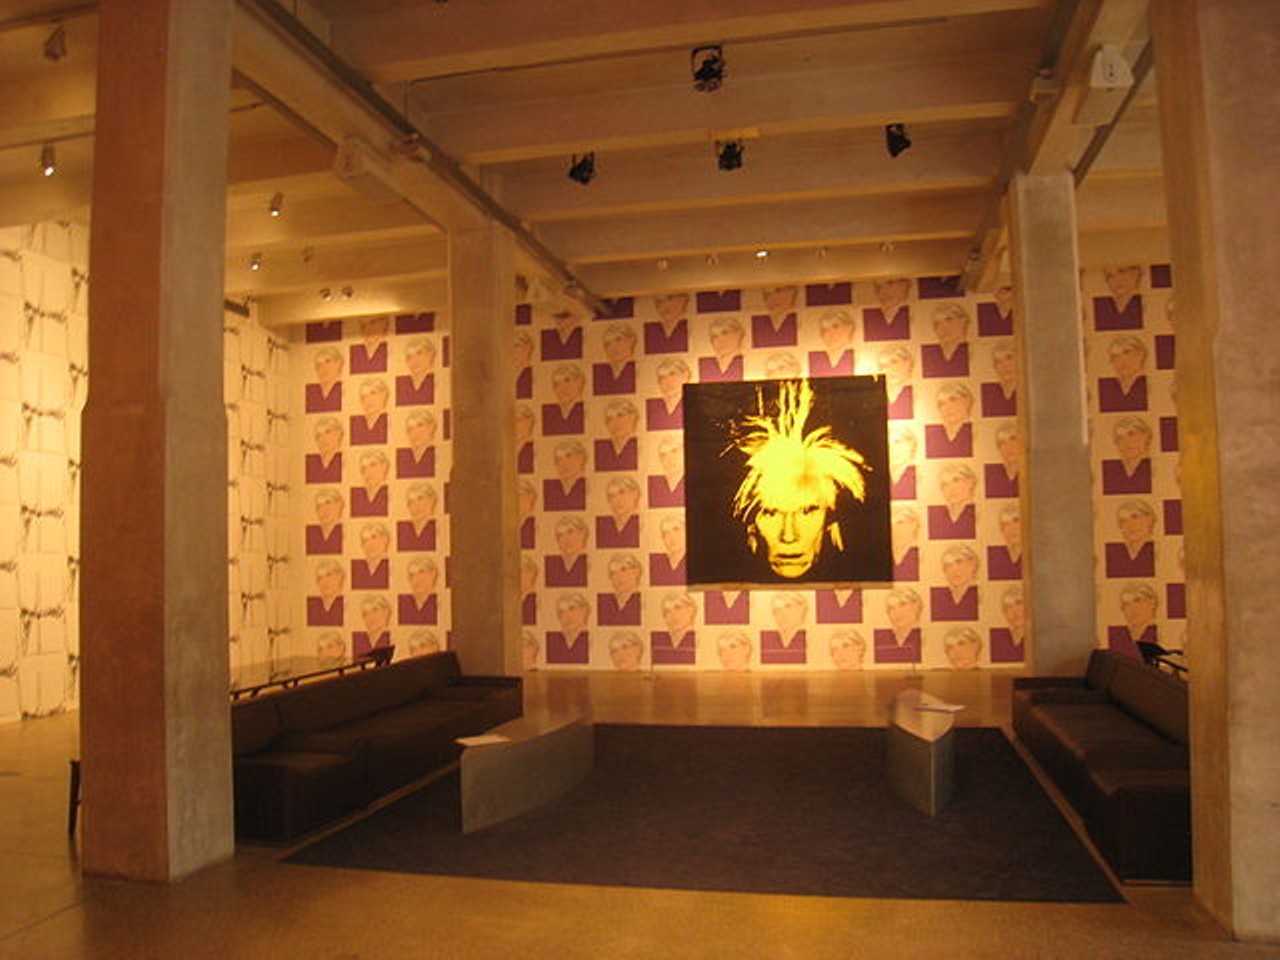  The Warhol Museum
Did you know that Andy Warhol was from nearby Pittsburgh? The pop artist is so associated with New York City that people often don&#146;t realize that he grew up in the nearby Steel City. With seven floors, the museum has an extensive collection of Warhol&#146;s art and is a must for any fan of the artist, art in general or American culture.
Photo via Wikimedia Commons